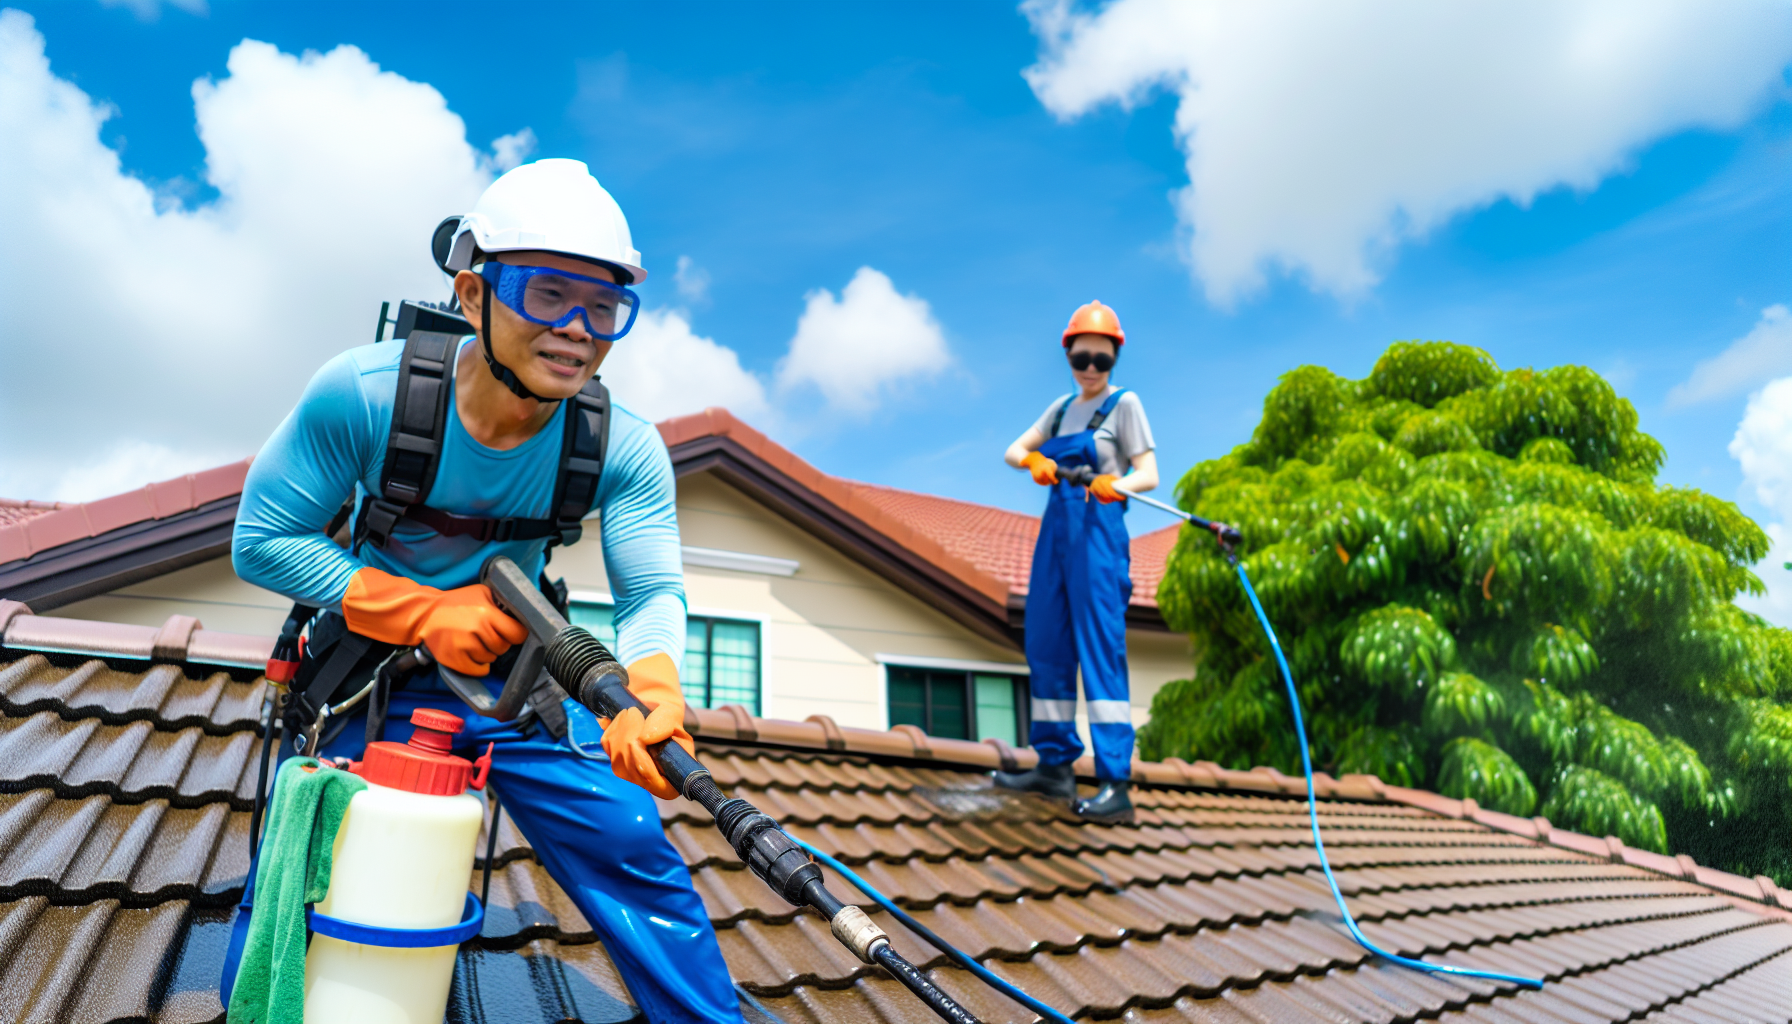 Professional roof cleaning equipment and expertise